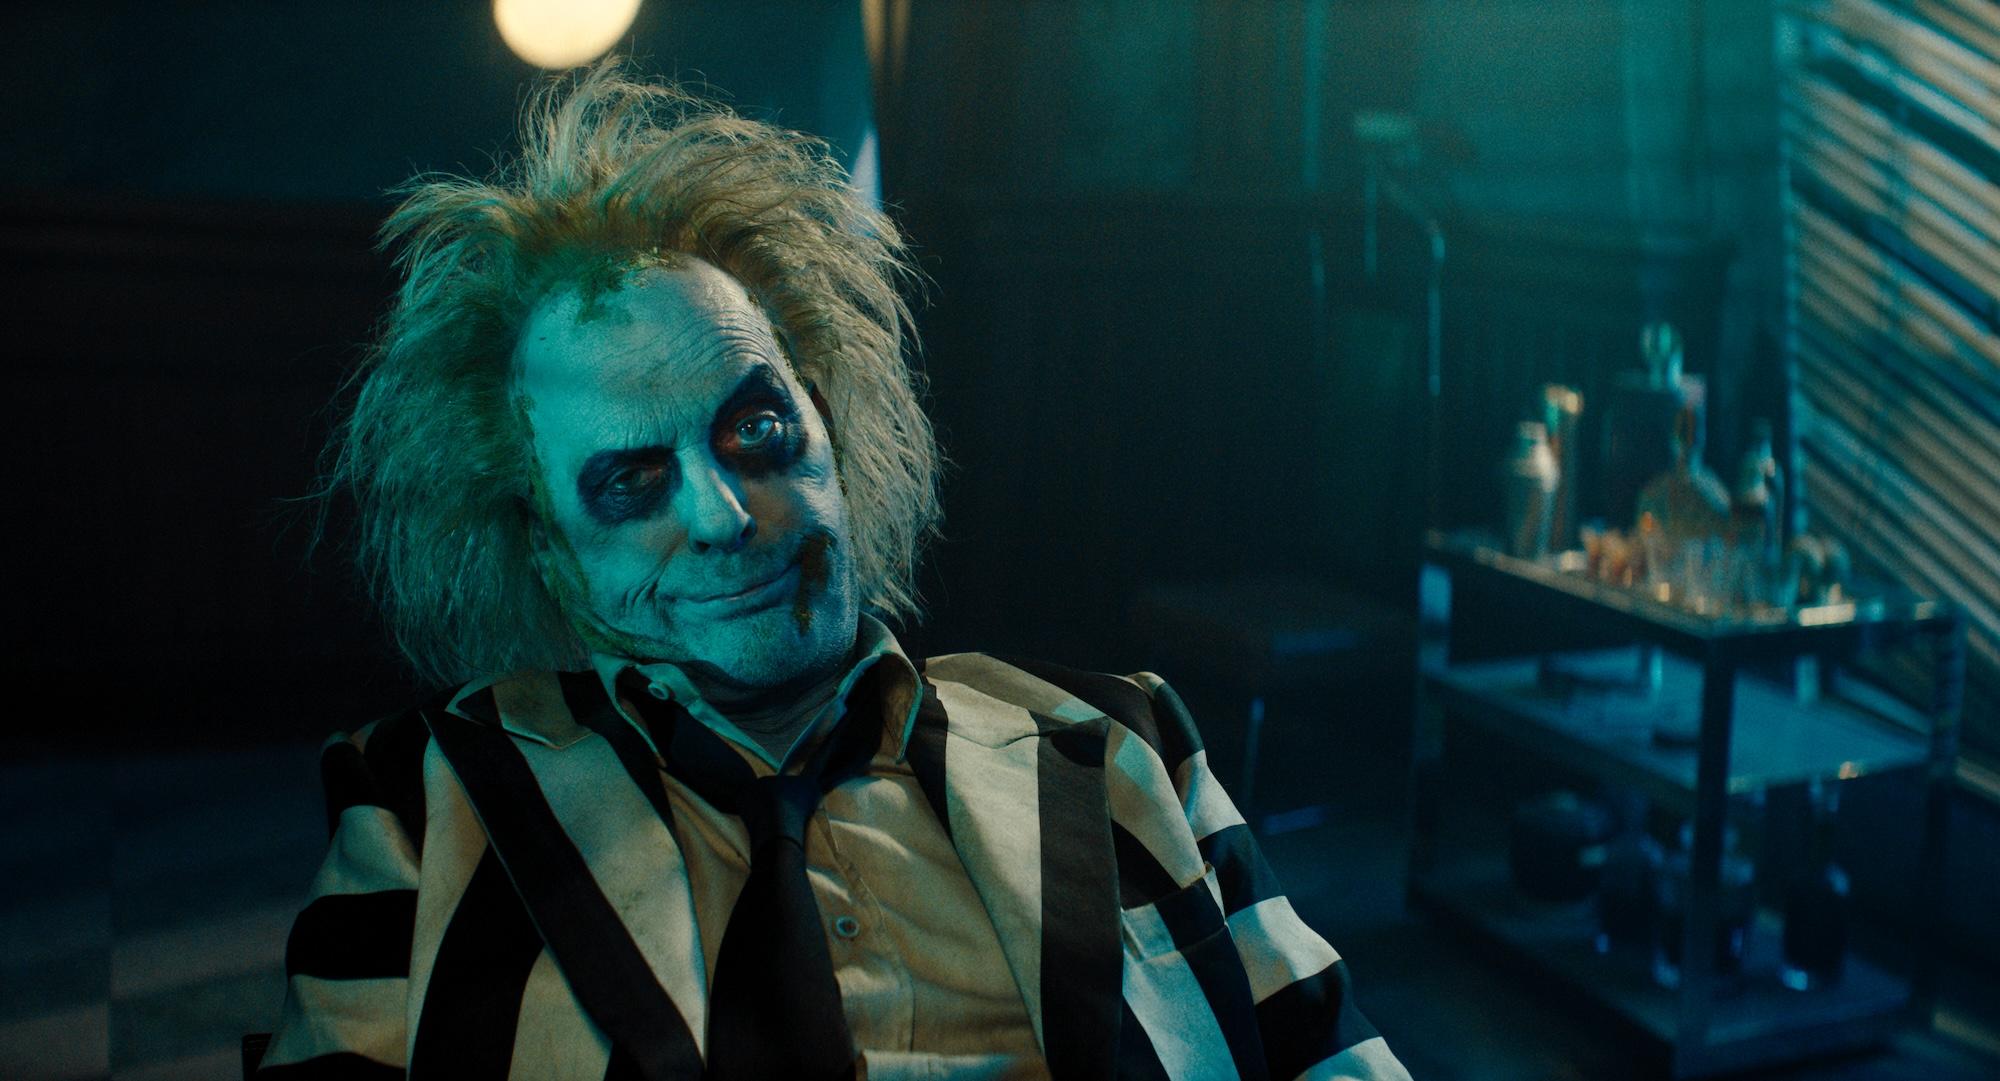 Why Beetlejuice 2's Old-School Effects are Stirring Buzz: Fans Debate CGI Choices in New Trailer